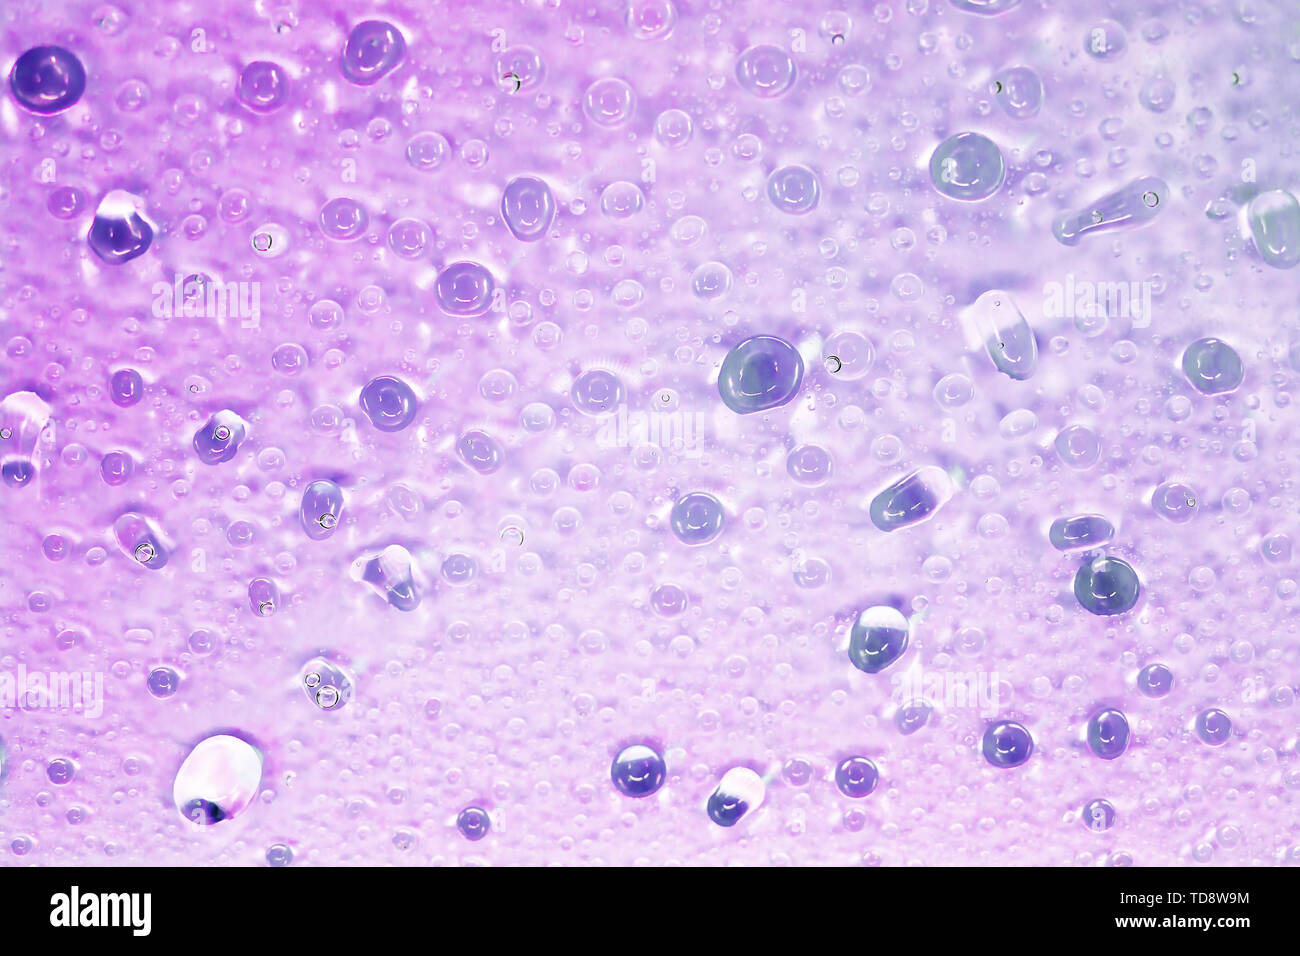 Beautiful violet drops of water fit for the background image Stock Photo